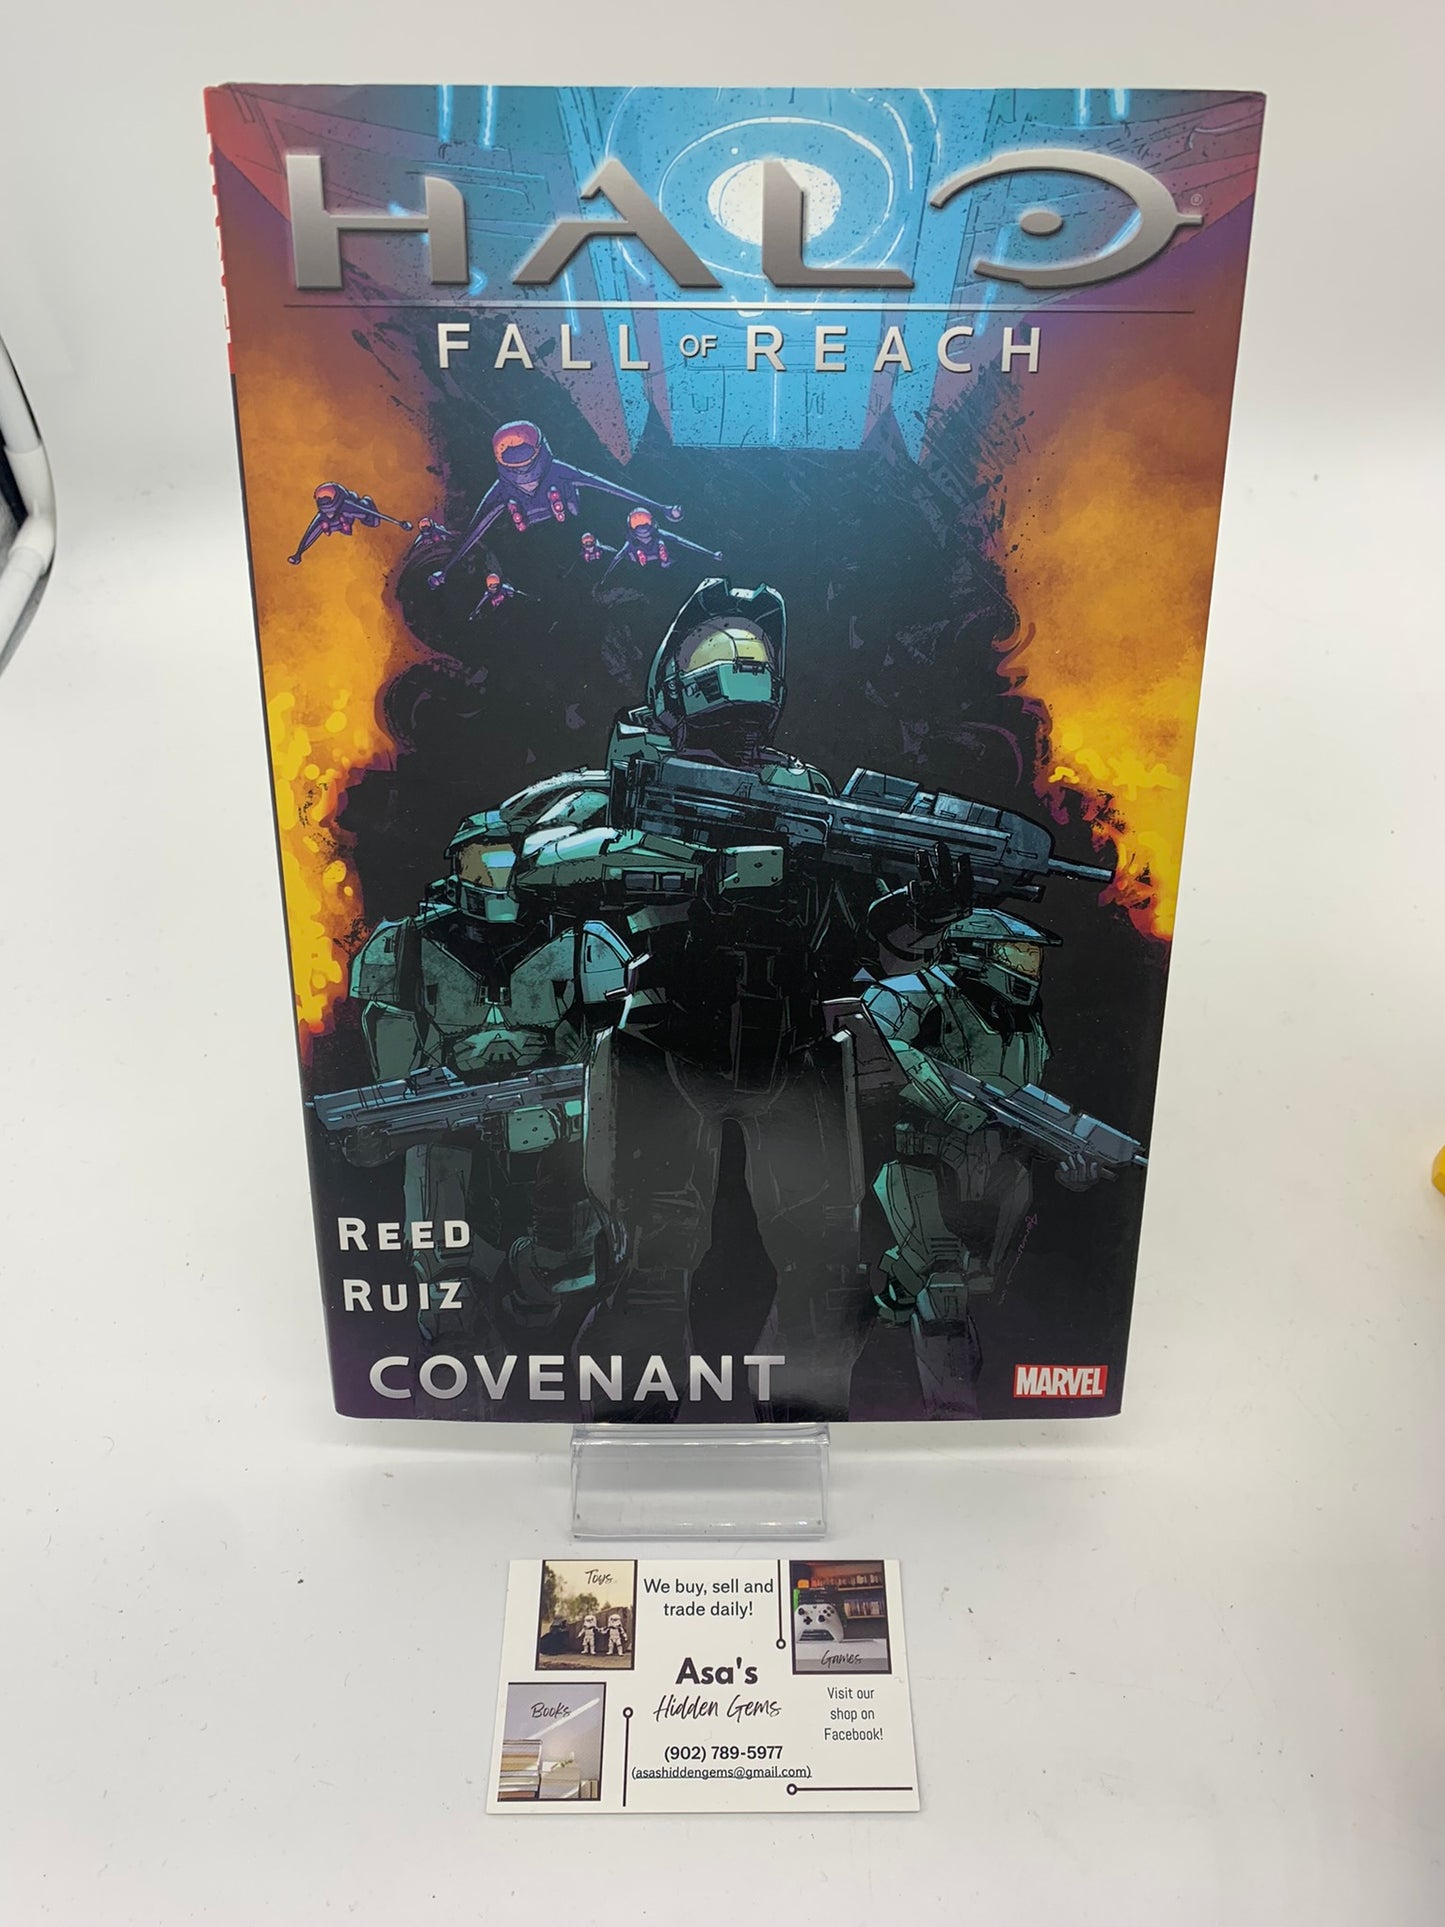 HALO Fall of REACH - COVENANT by Brian Reed